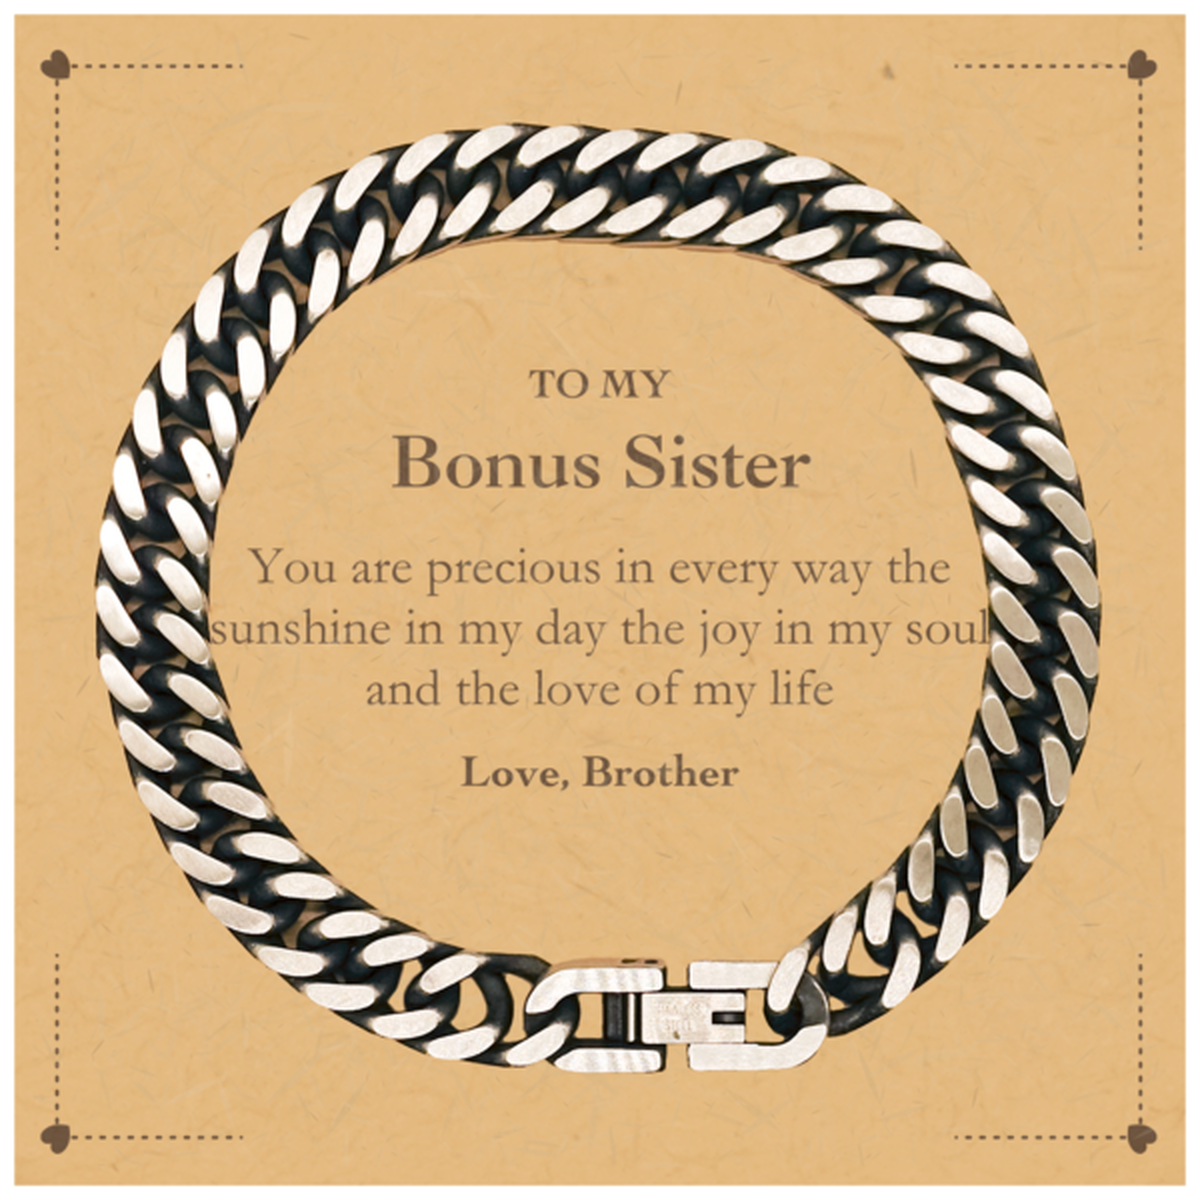 Graduation Gifts for Bonus Sister Cuban Link Chain Bracelet Present from Brother, Christmas Bonus Sister Birthday Gifts Bonus Sister You are precious in every way the sunshine in my day. Love, Brother